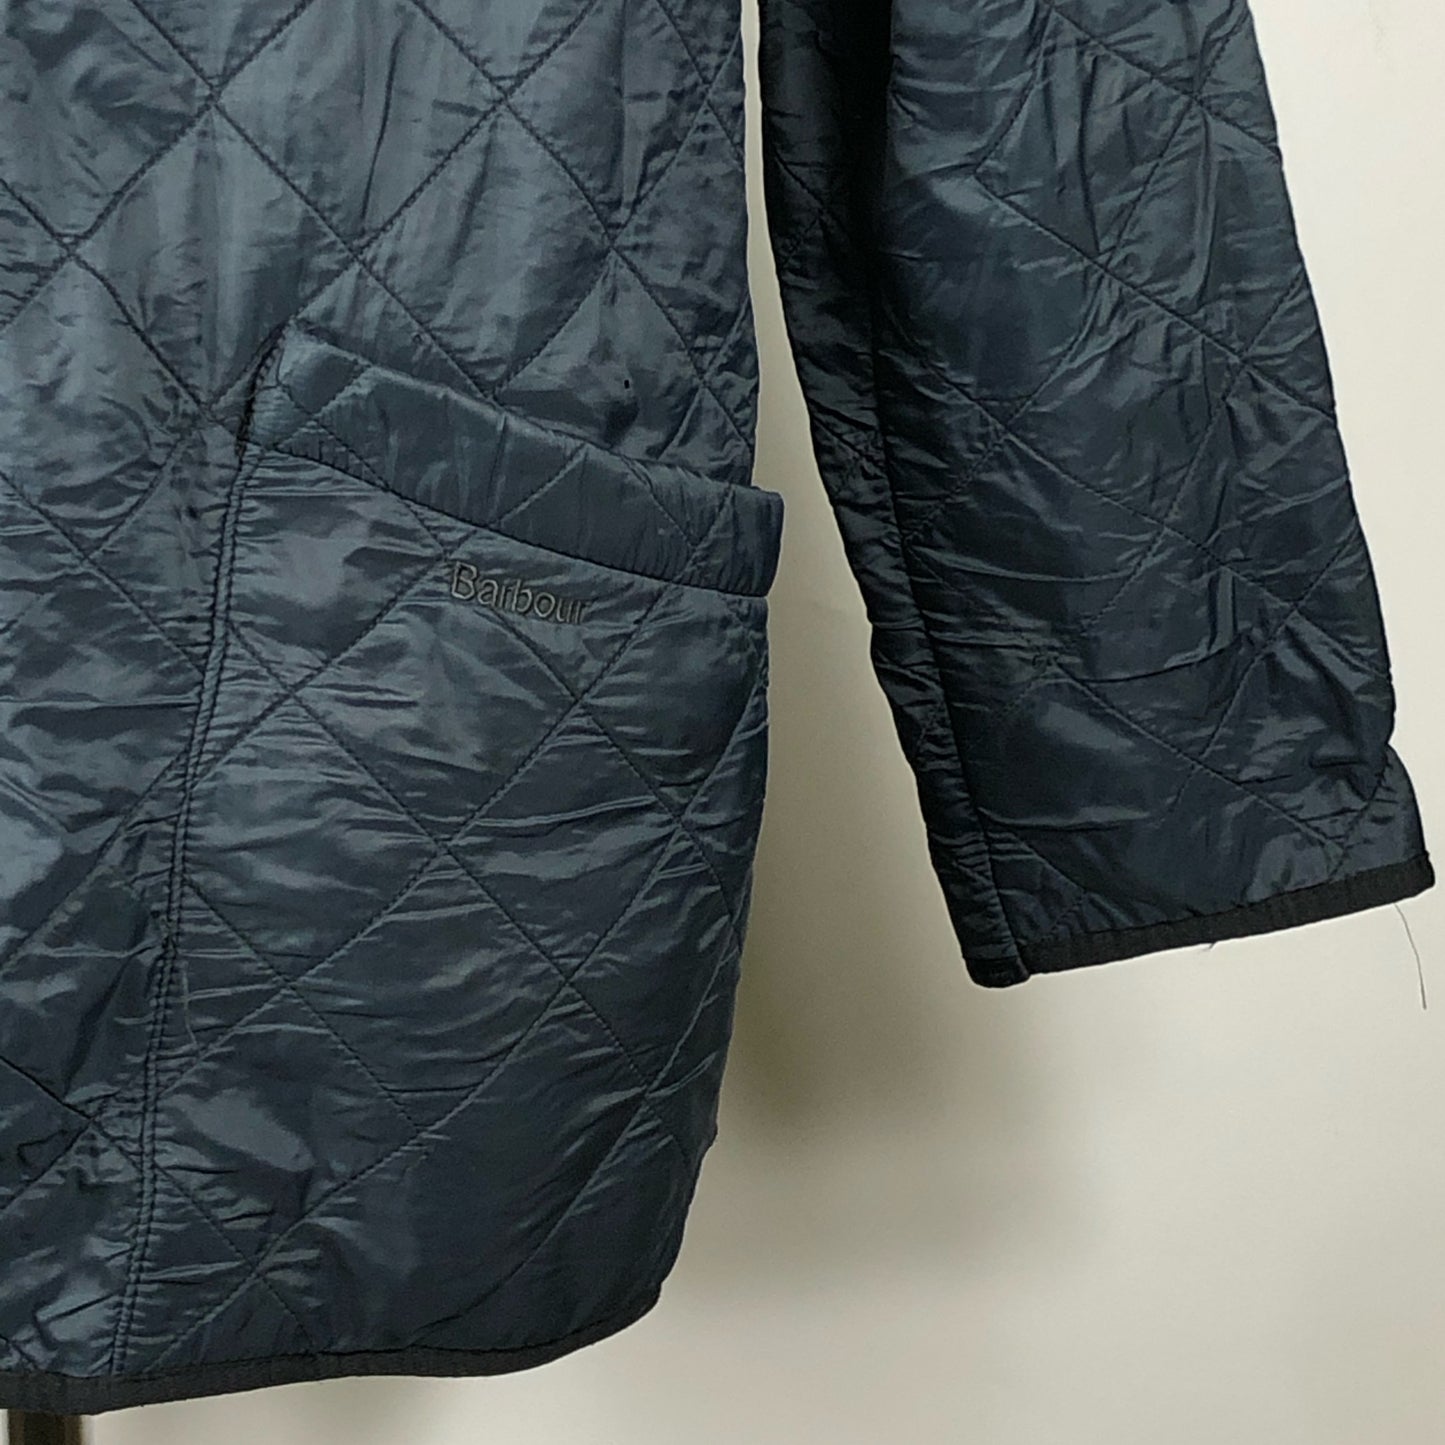 Giacca a vento trapuntata Barbour Blu Medium - Quilted Duracotton Navy Jacket Size M